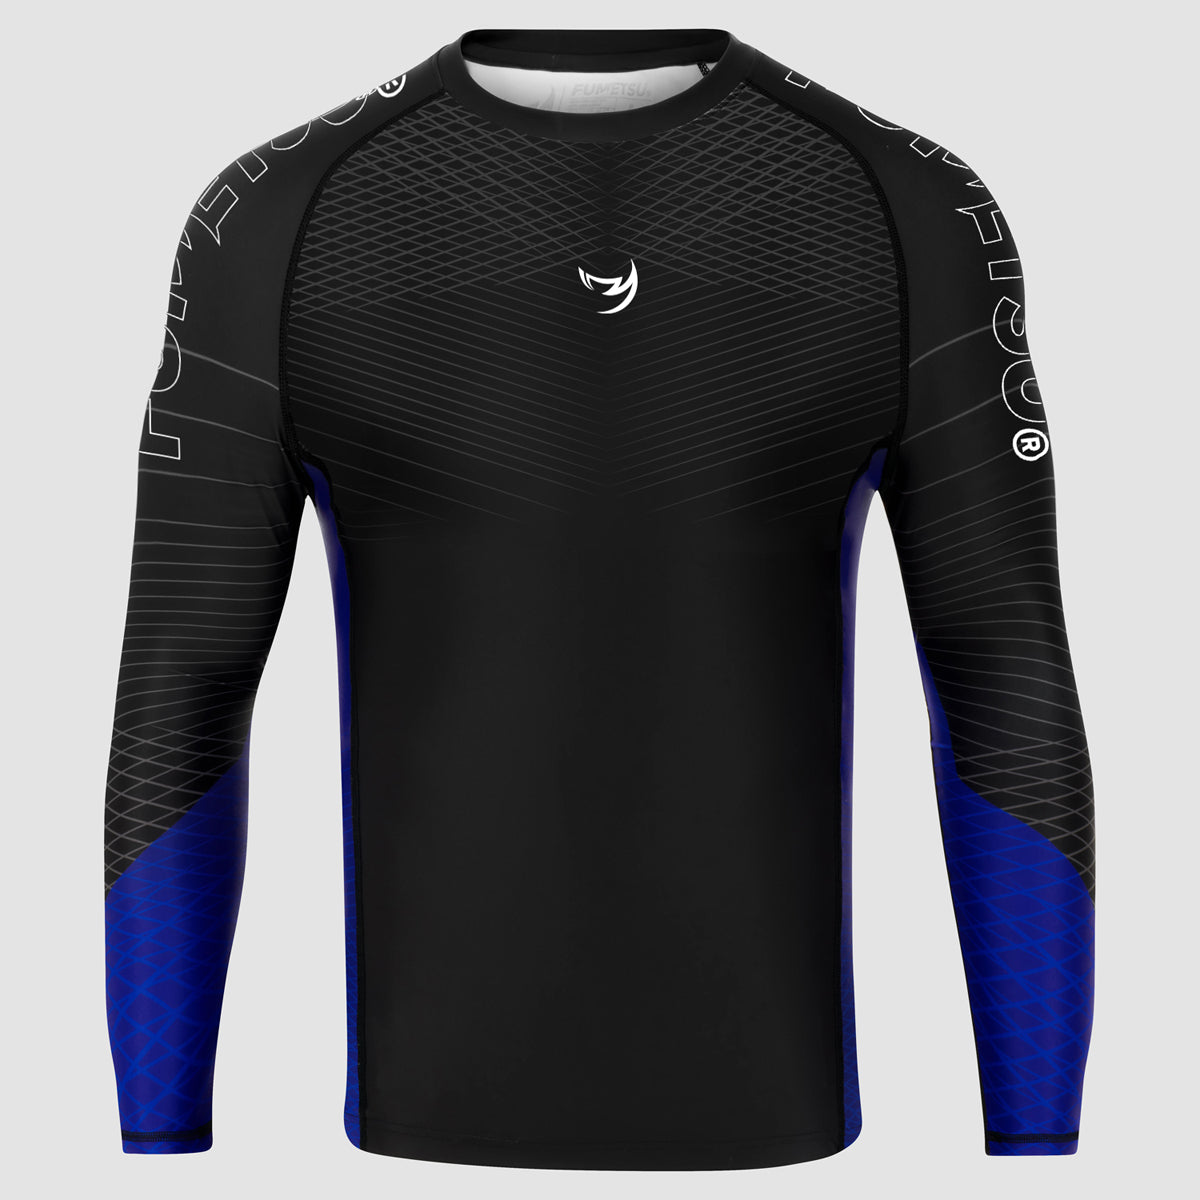 Blue MMA Rashguards from Made4Fighters